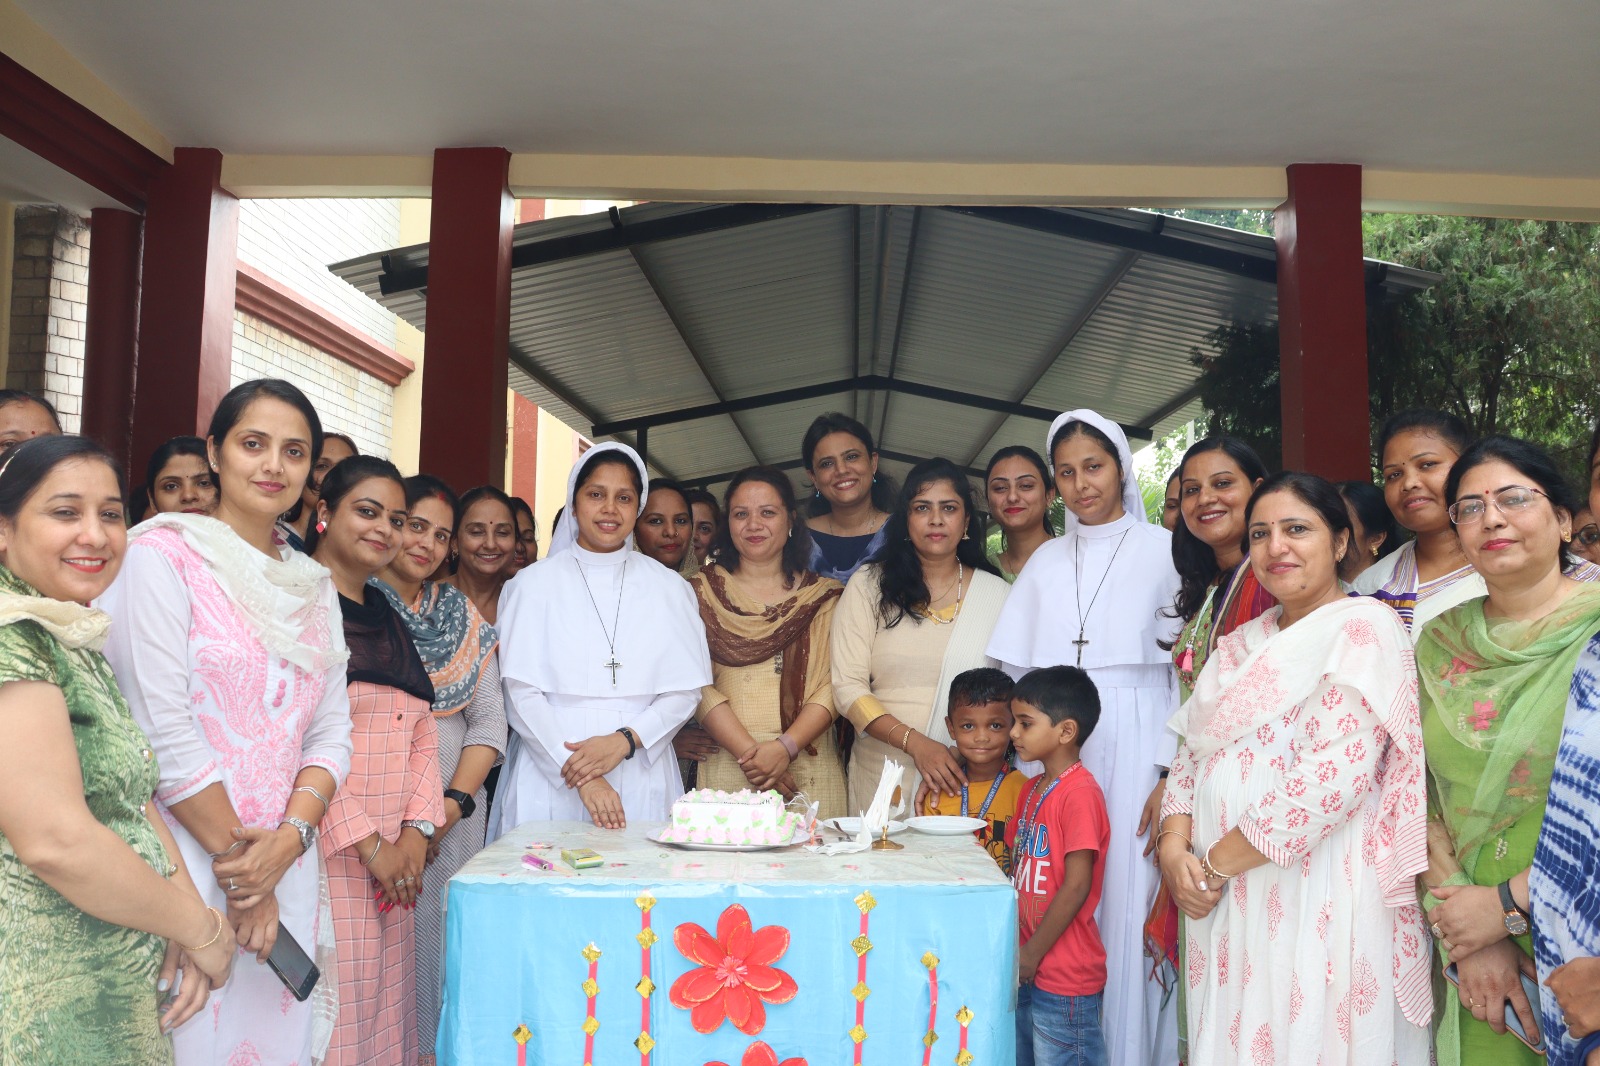 September 8 is  the Nativity of the Blessed Virgin Mary, the Mother of  Jesus Christ.  The staff of Pre-primary organized a grace filled prayer service imploring the divine blessings for the entire Sacred Heart Fraternity. The celebration ended with the cake-cutting and snacks party.